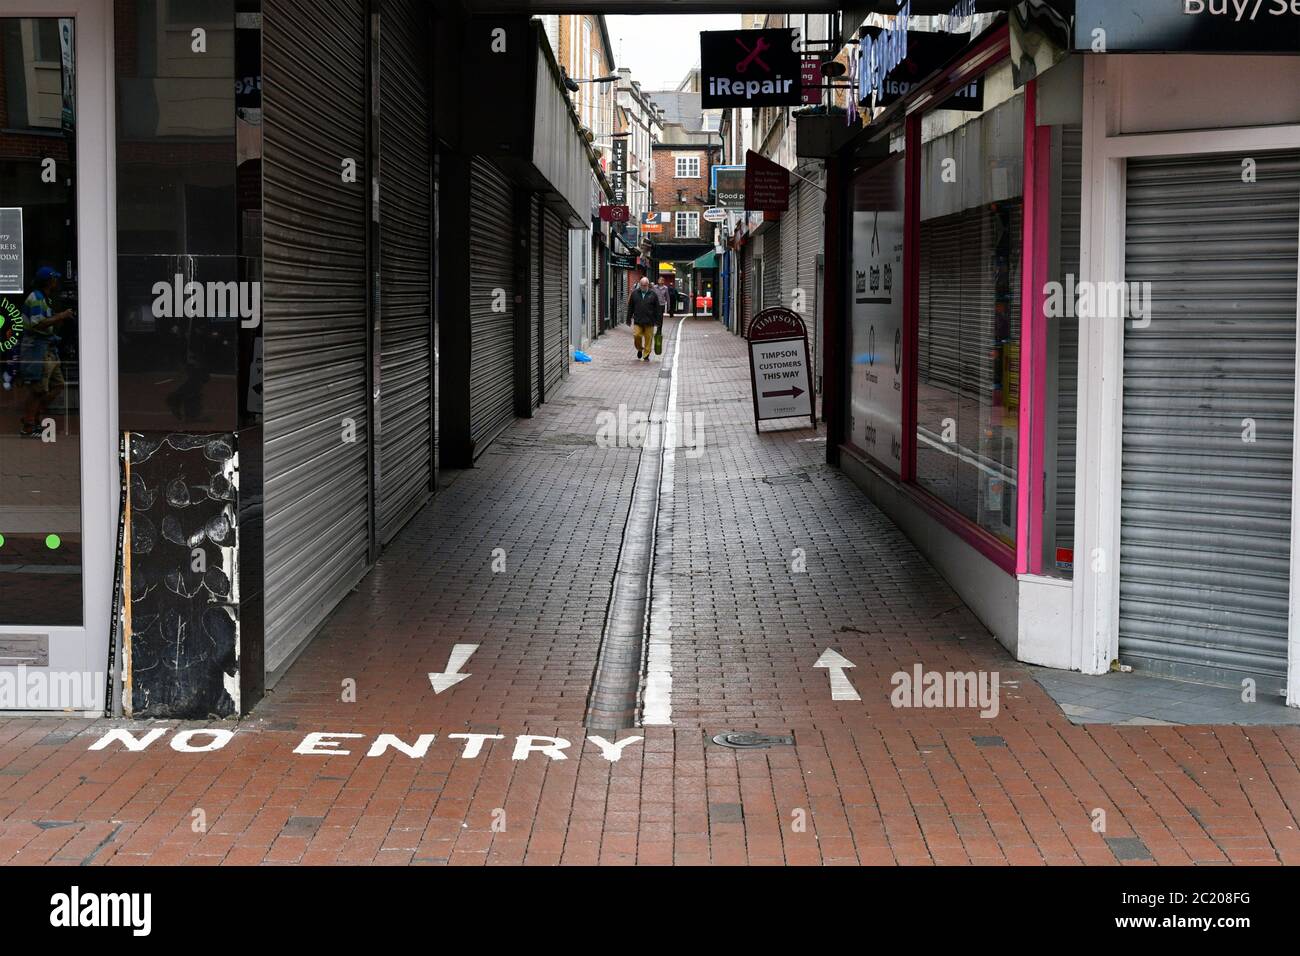 Union Street, also known as Smelly Alley, marked out for pedestrians. Easing of Coronavirus lockdown, Reading, UK 12 June 2020 Stock Photo